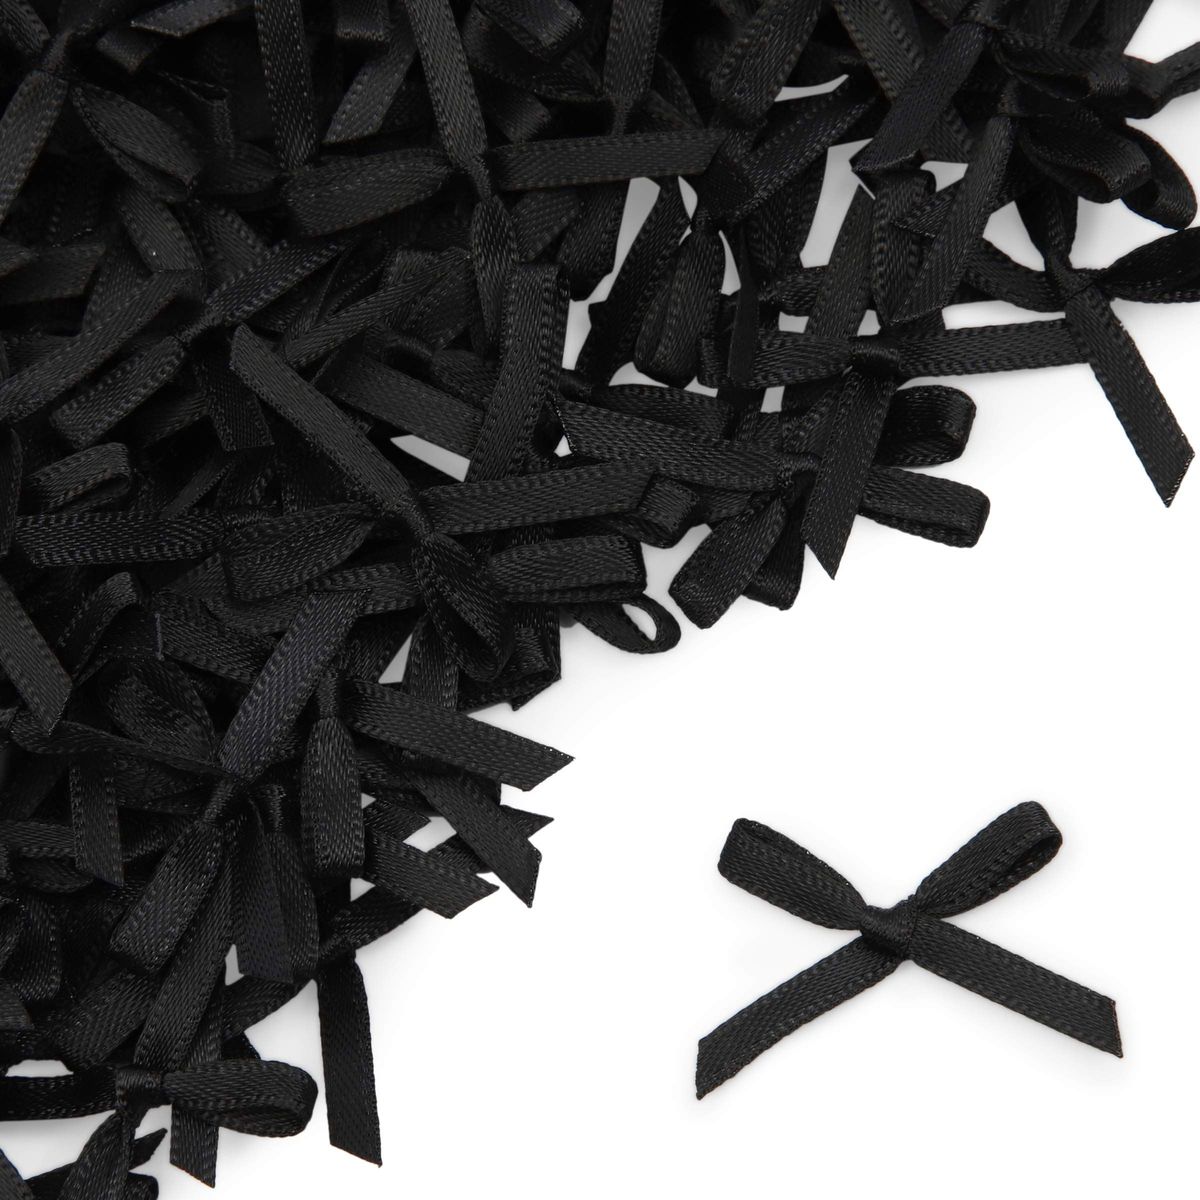 200 Pack Mini Black Satin Bows for Gift Wrapping, Self Adhesive Ribbons for  DIY Crafts, Scrapbooking, 1.5 in